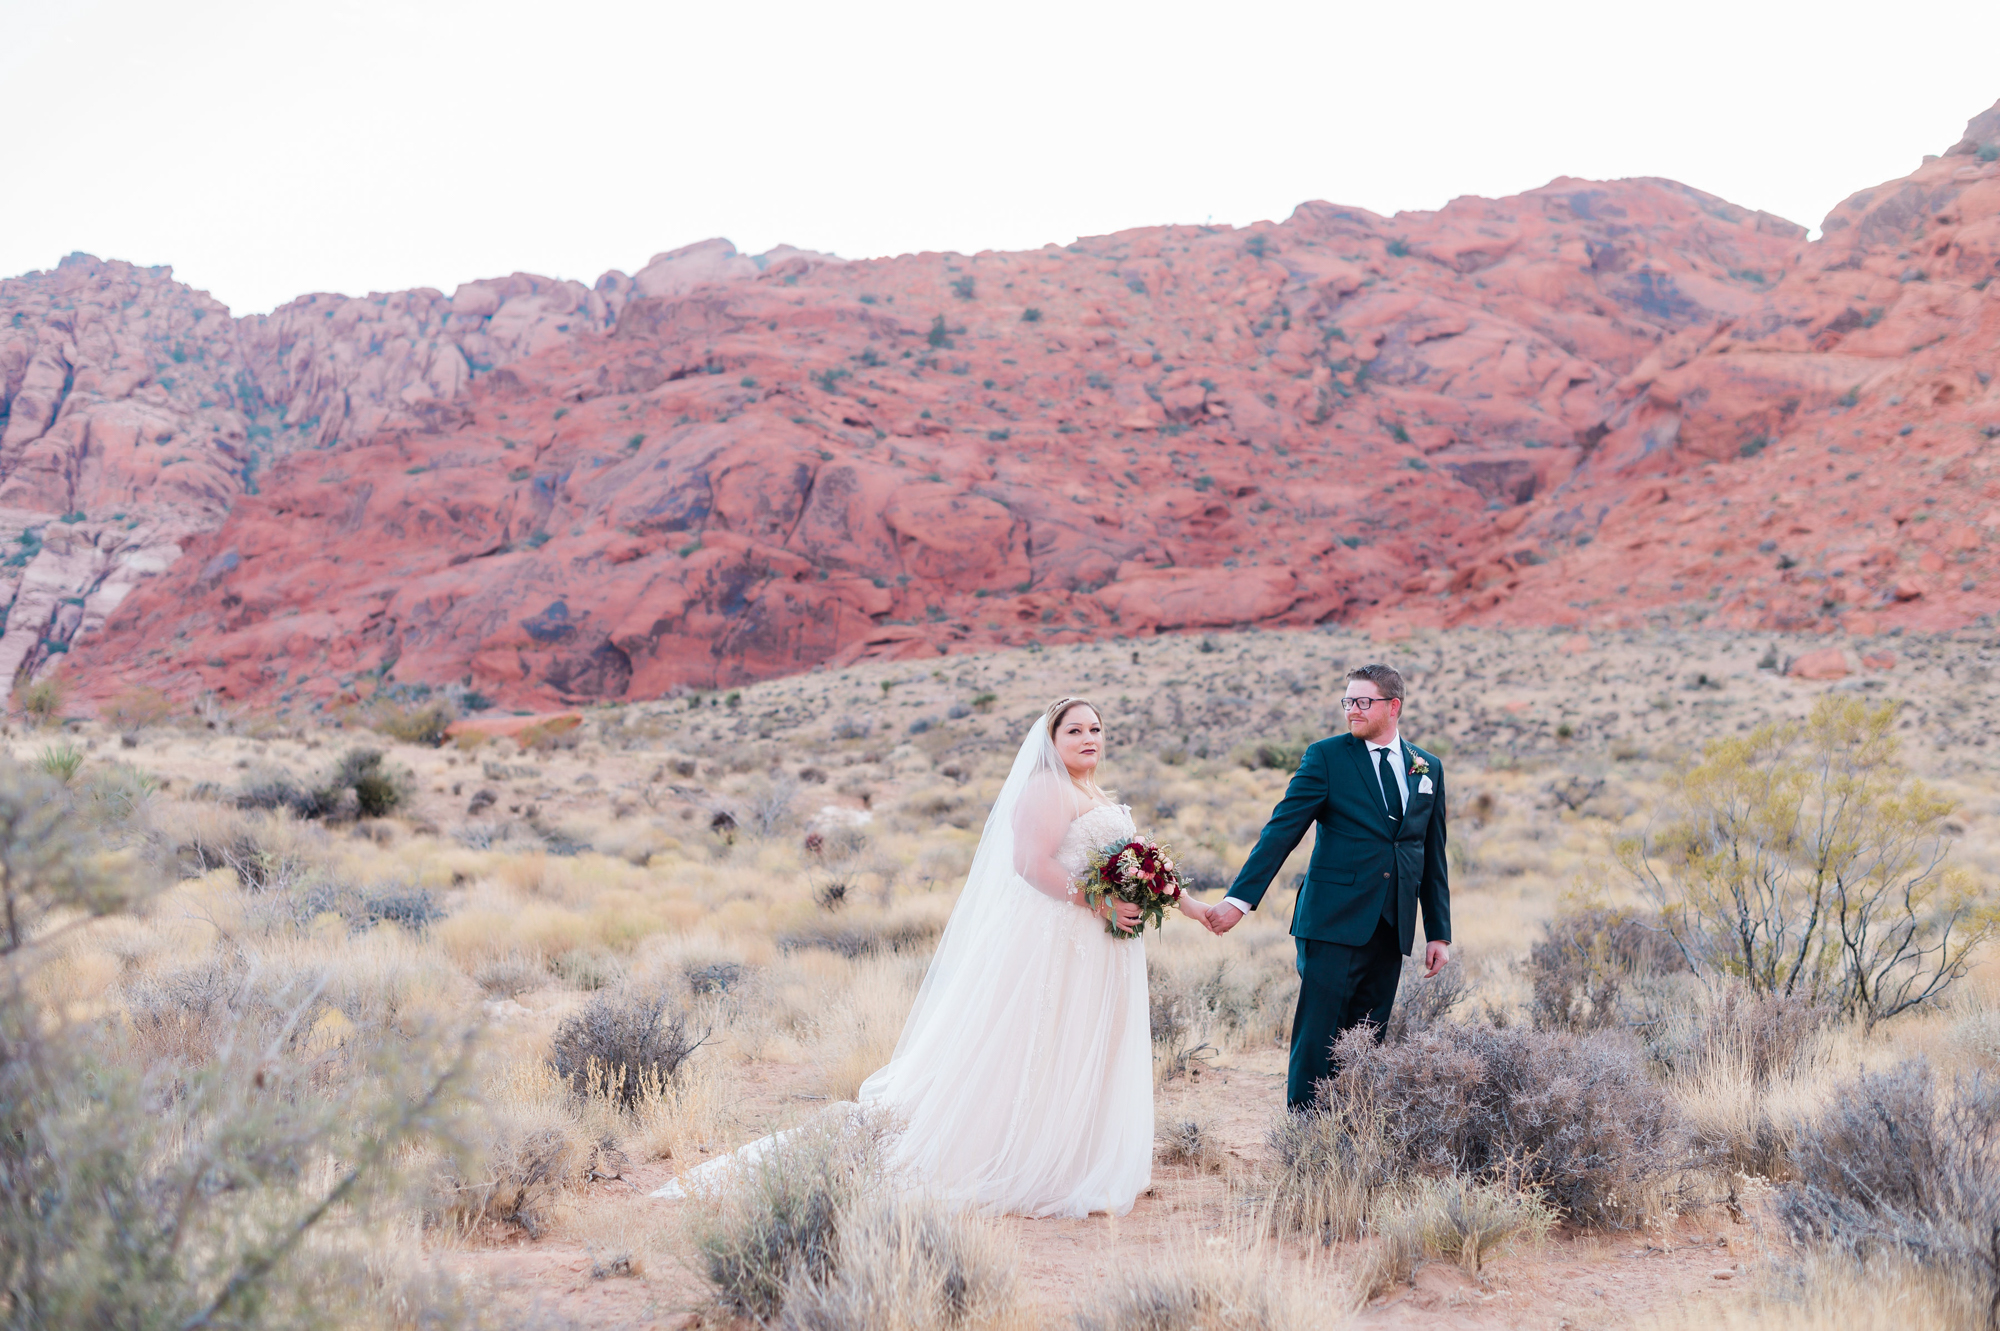 Ines + Dustin: A Real Wedding in Ash Spring